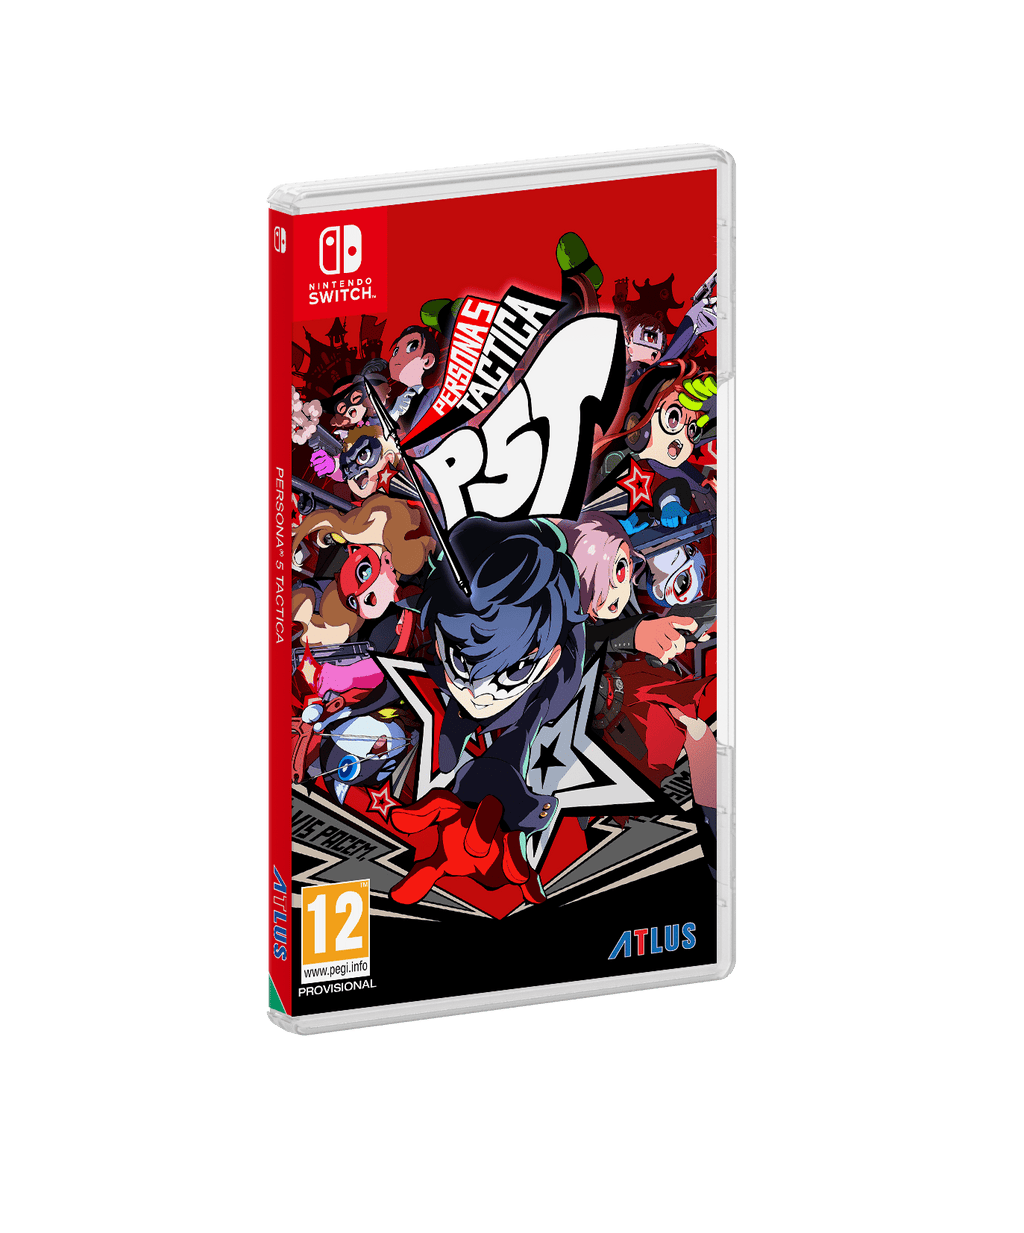 Persona 5 Tactica Has A Launch-Day Edition Exclusive To GameStop - GameSpot